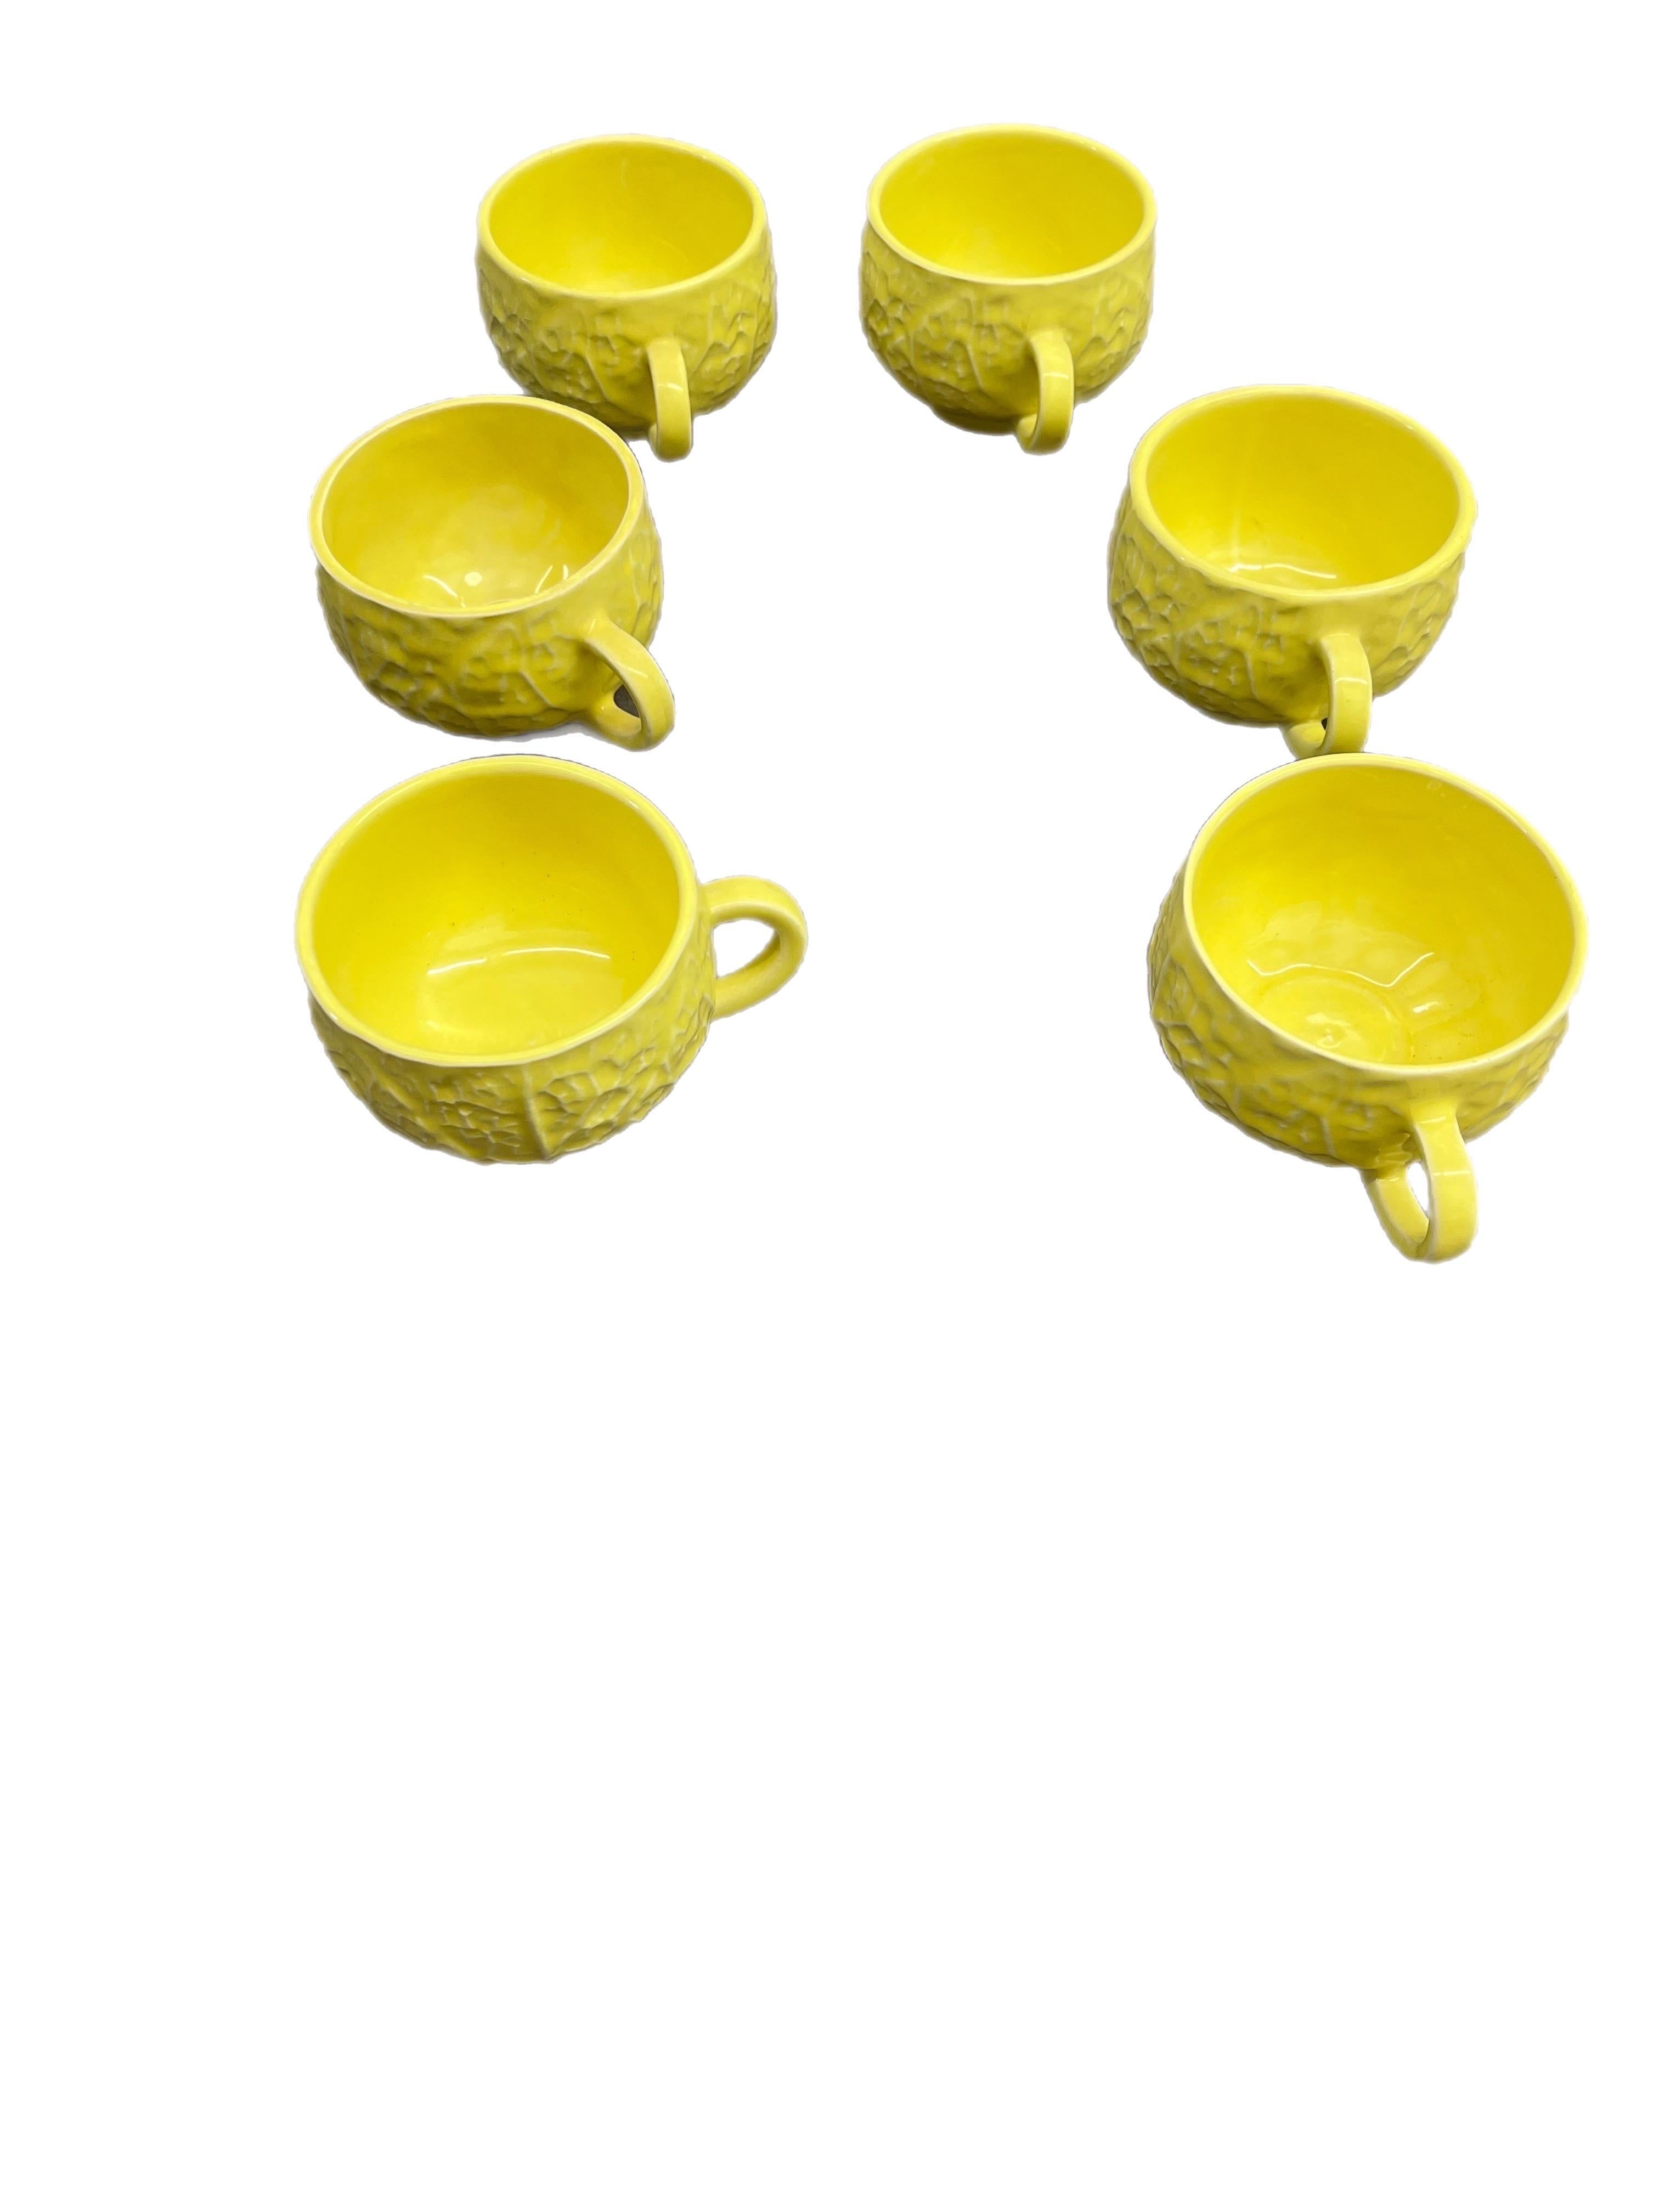 20th Century Vintage Secla Yellow Cabbage Dish Set- 21 Pieces